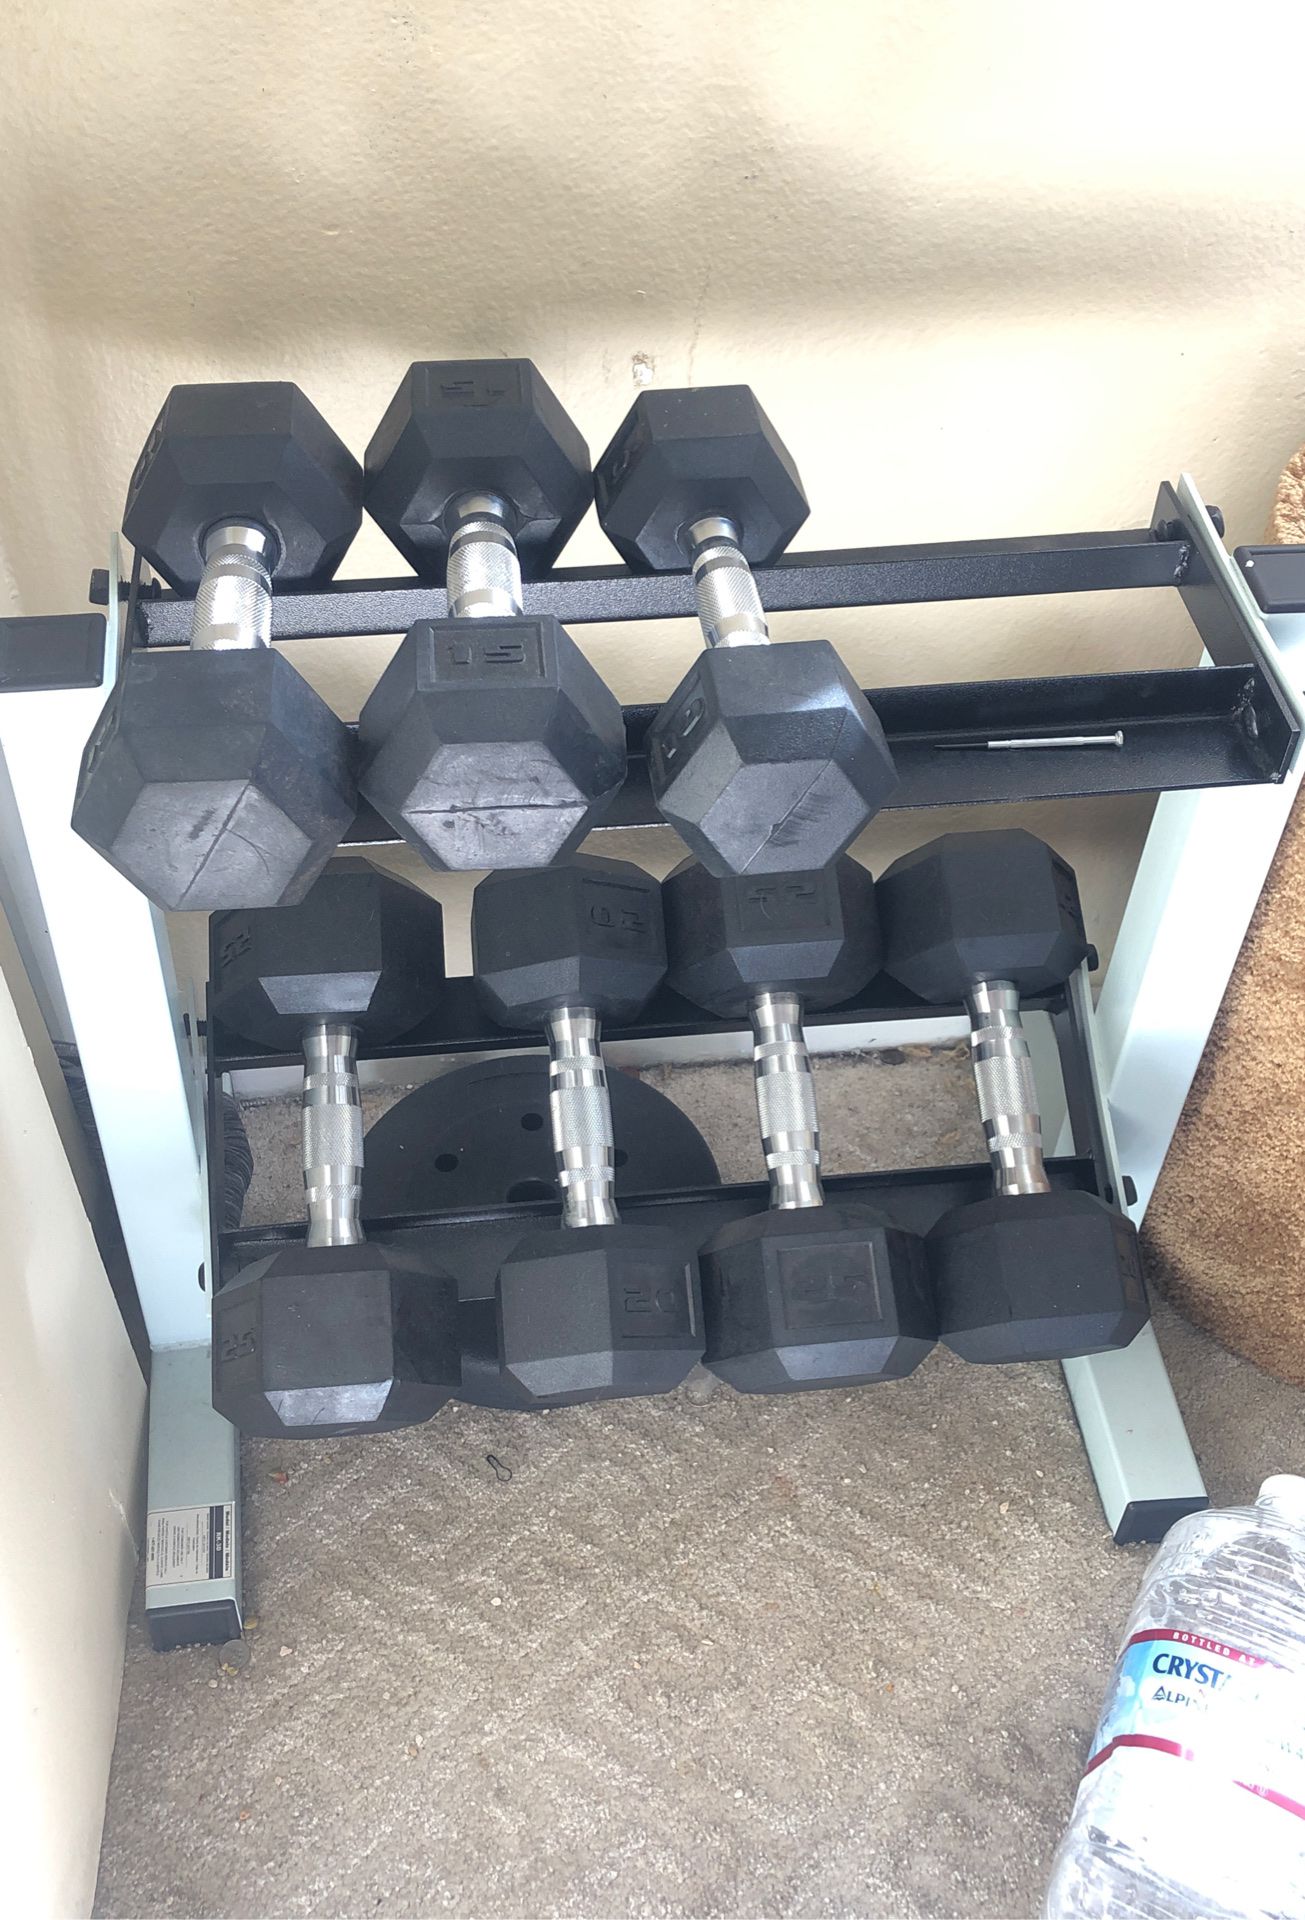 Weight set 5lbs up to 25lbs FIRM PRICE